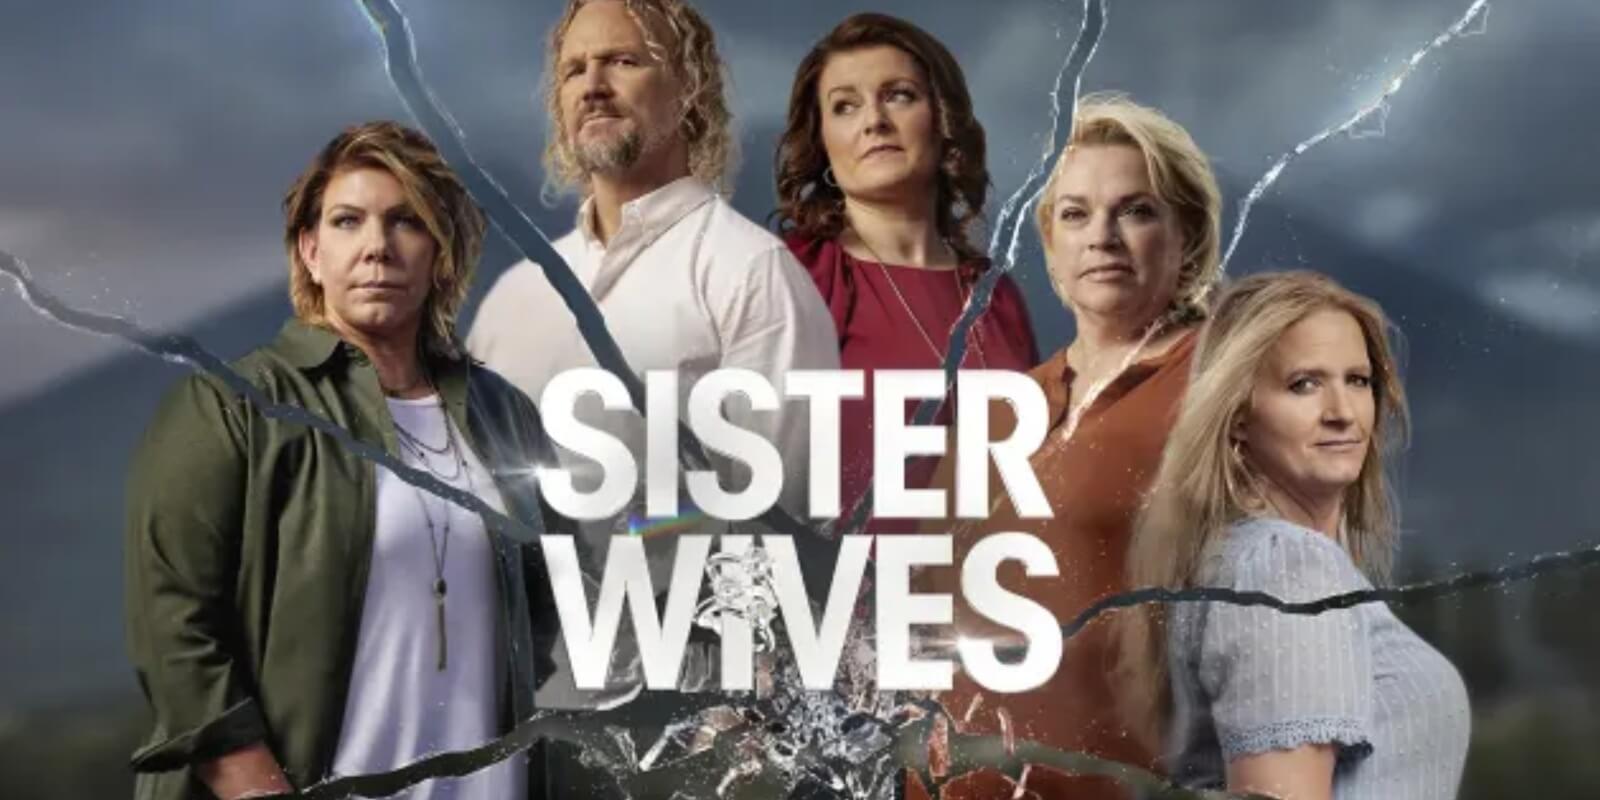 The cast of TLC's 'Sister Wives' in key art for season 18 includes Meri, Kody, Robyn, Janelle and Christine Brown.